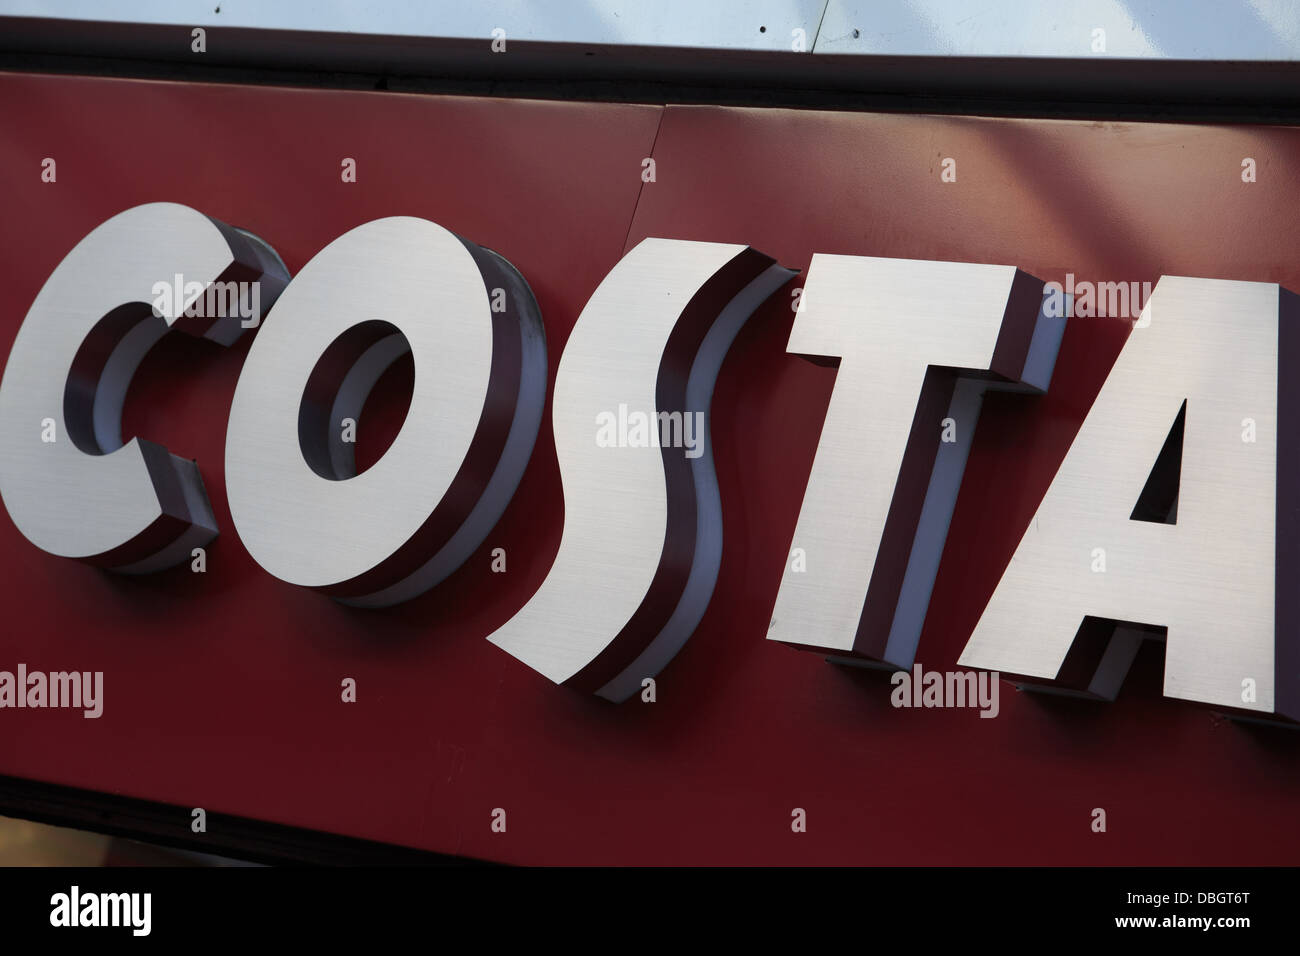 30/07/2013 Costa coffee, shop sign in Southend-on-sea Stock Photo